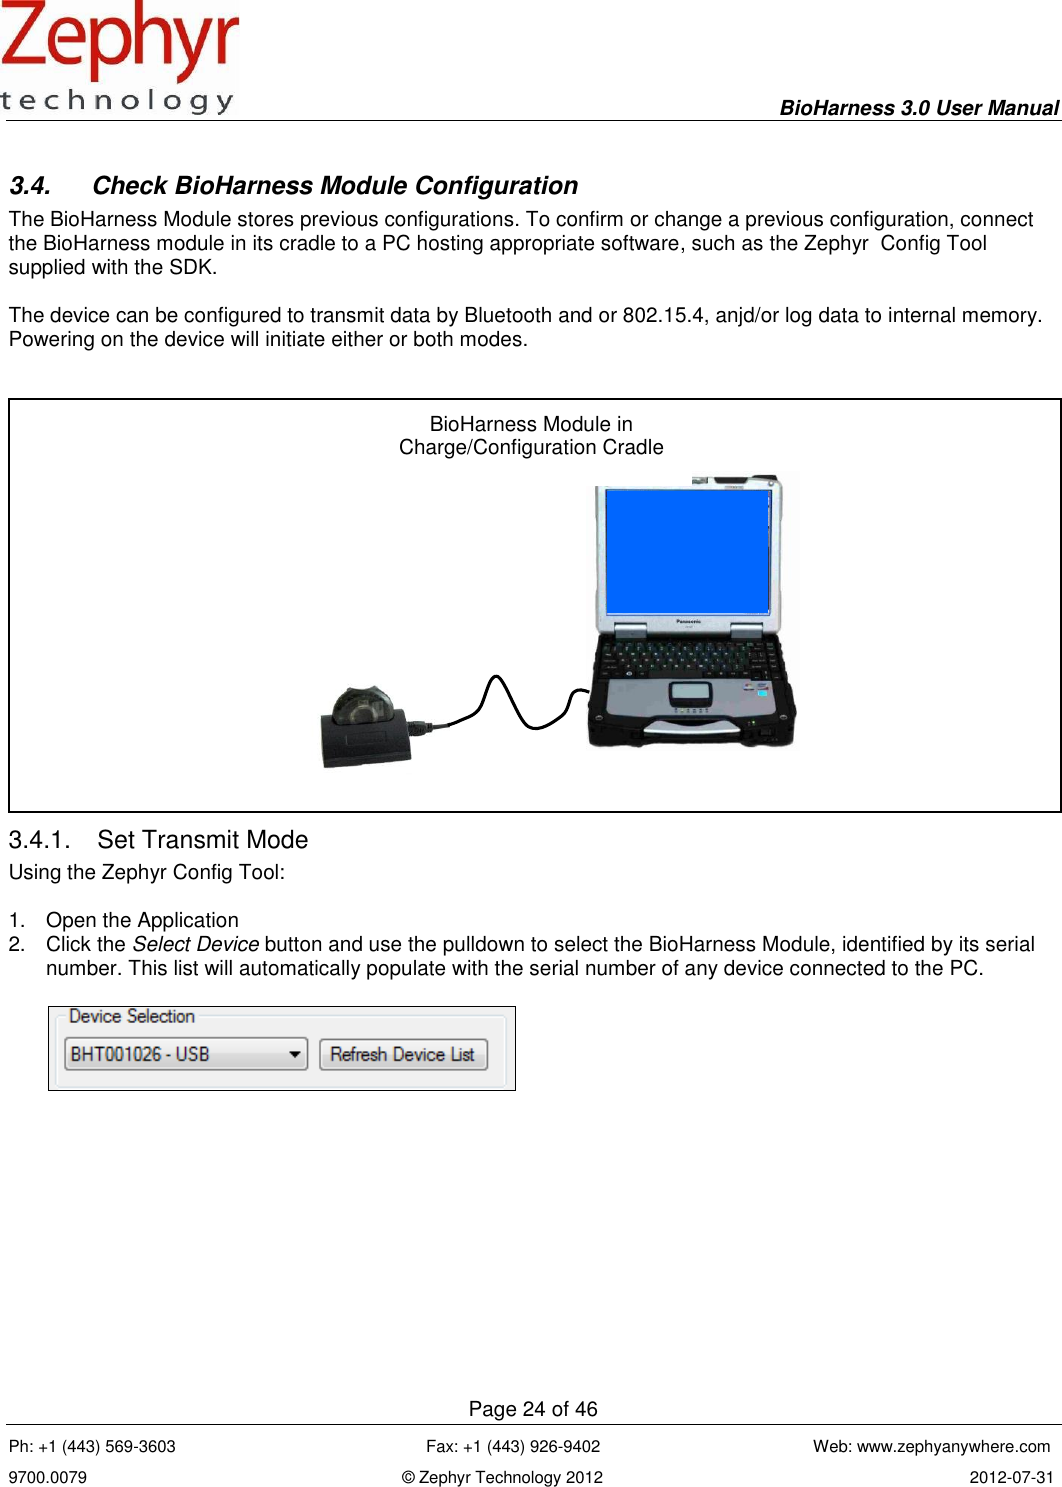     BioHarness 3.0 User Manual  Page 24 of 46 Ph: +1 (443) 569-3603                                                      Fax: +1 (443) 926-9402                                              Web: www.zephyanywhere.com 9700.0079                                                                    © Zephyr Technology 2012                                                                               2012-07-31                                                                                                                                      3.4.  Check BioHarness Module Configuration The BioHarness Module stores previous configurations. To confirm or change a previous configuration, connect the BioHarness module in its cradle to a PC hosting appropriate software, such as the Zephyr  Config Tool supplied with the SDK.   The device can be configured to transmit data by Bluetooth and or 802.15.4, anjd/or log data to internal memory. Powering on the device will initiate either or both modes.    3.4.1.  Set Transmit Mode Using the Zephyr Config Tool:  1.  Open the Application 2.  Click the Select Device button and use the pulldown to select the BioHarness Module, identified by its serial number. This list will automatically populate with the serial number of any device connected to the PC.       BioHarness Module in Charge/Configuration Cradle 